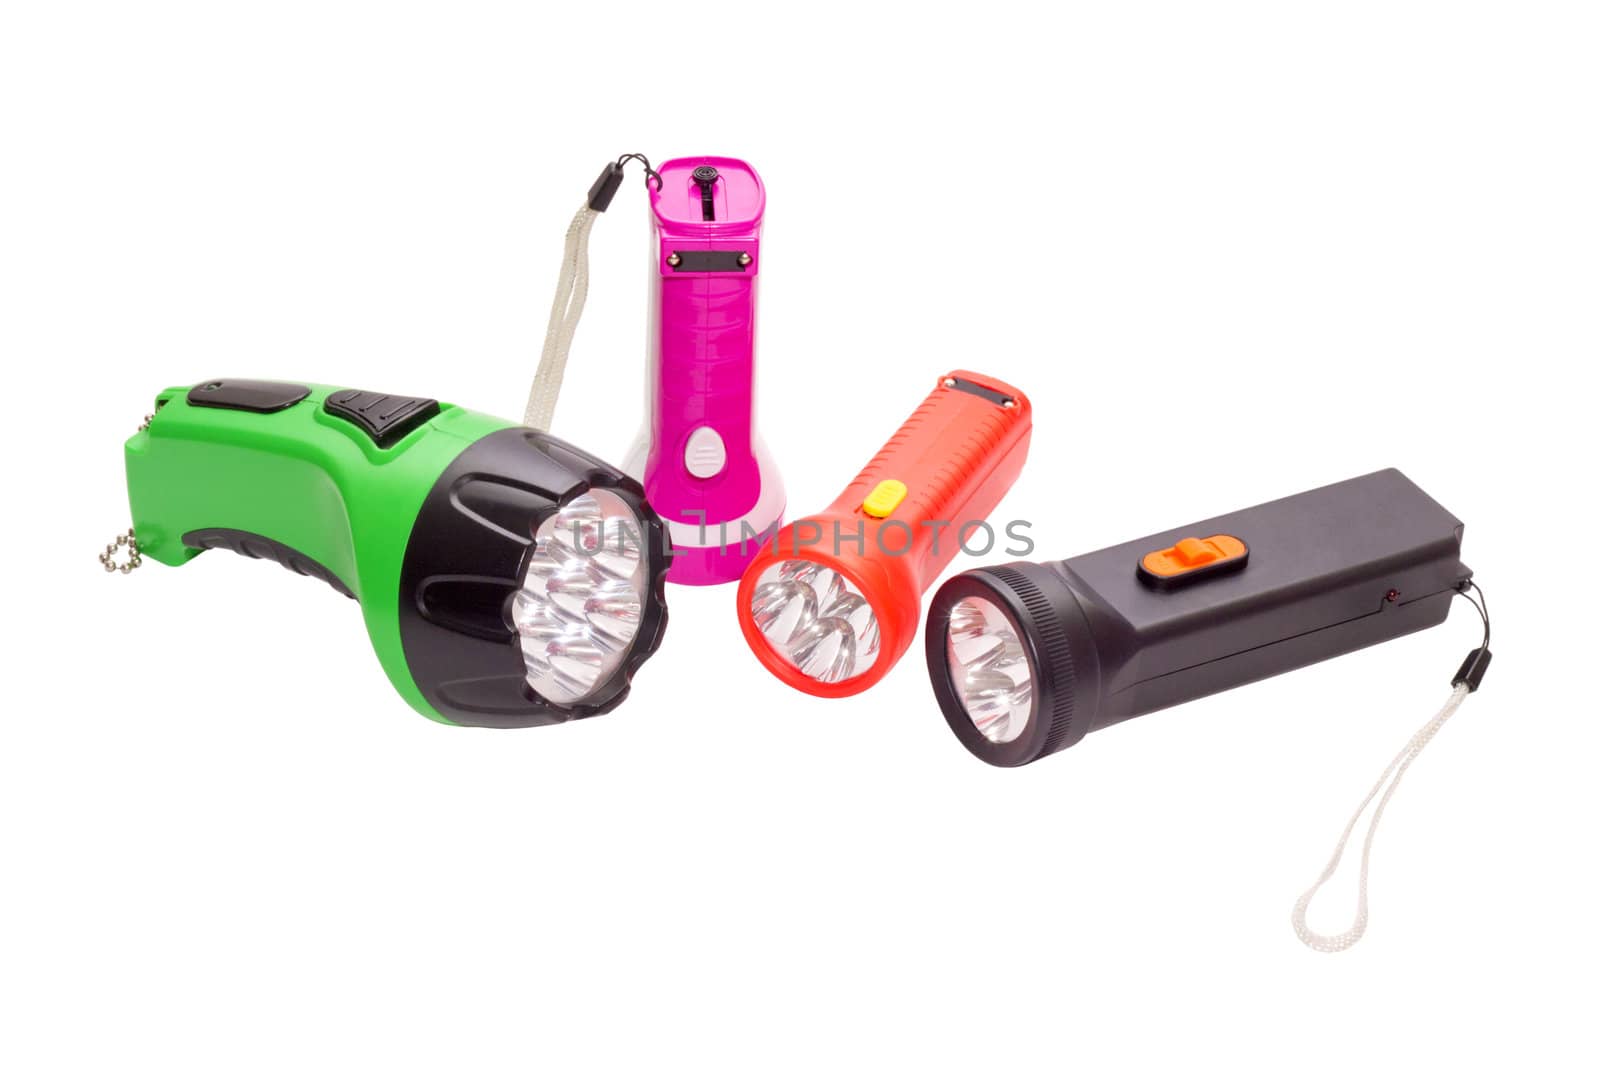 four differently colored LED flashlight on a white background